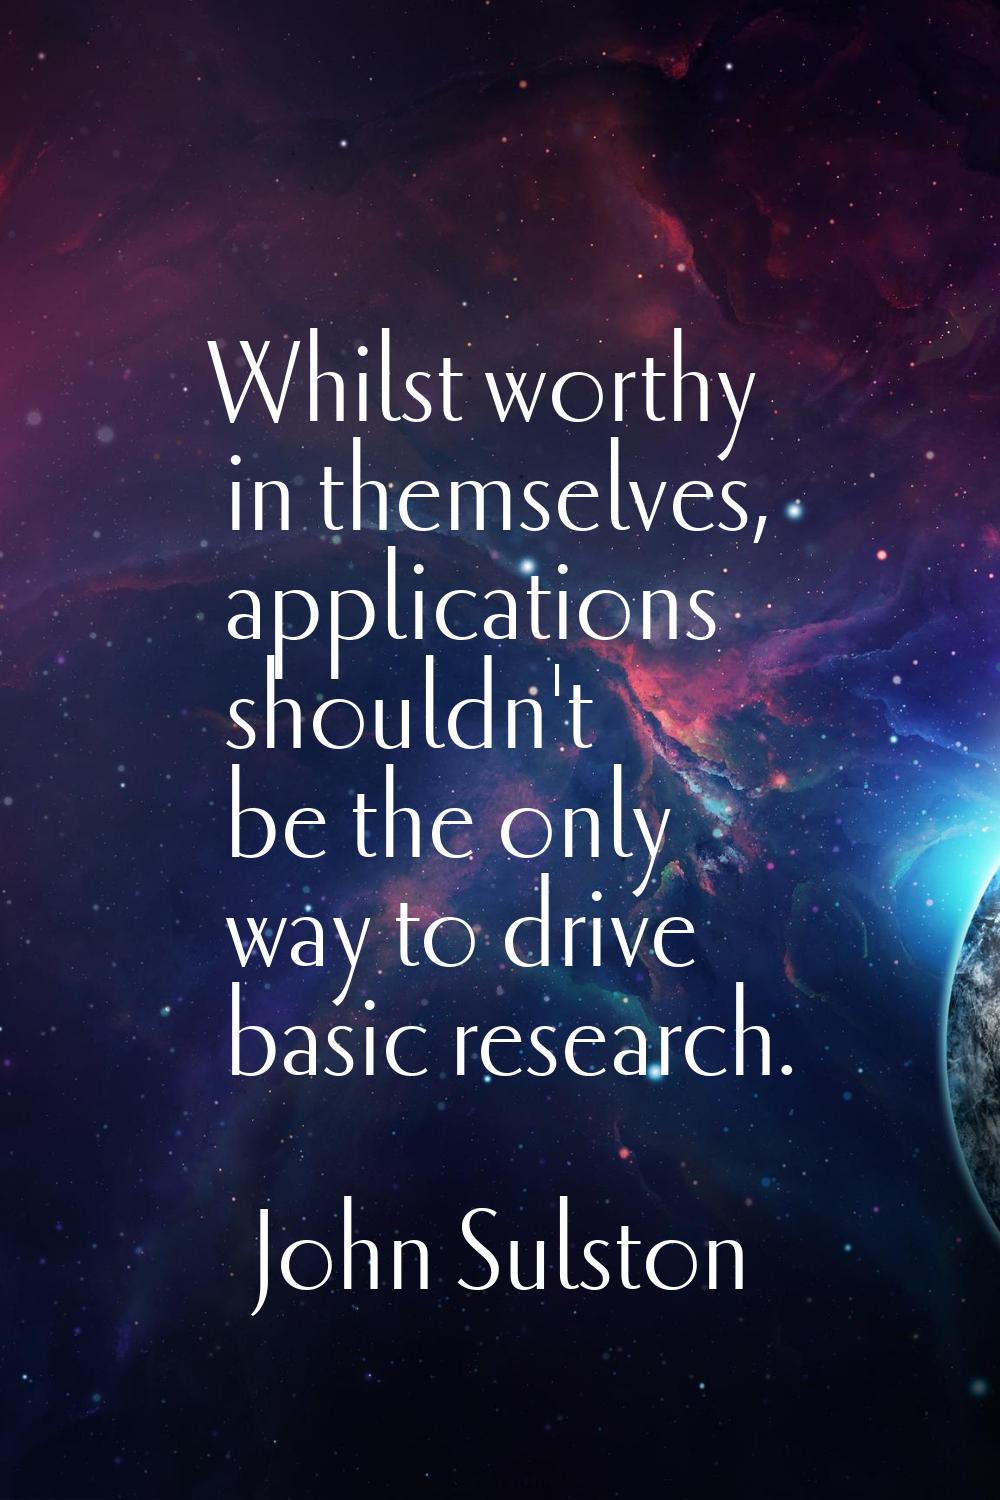 Whilst worthy in themselves, applications shouldn't be the only way to drive basic research.